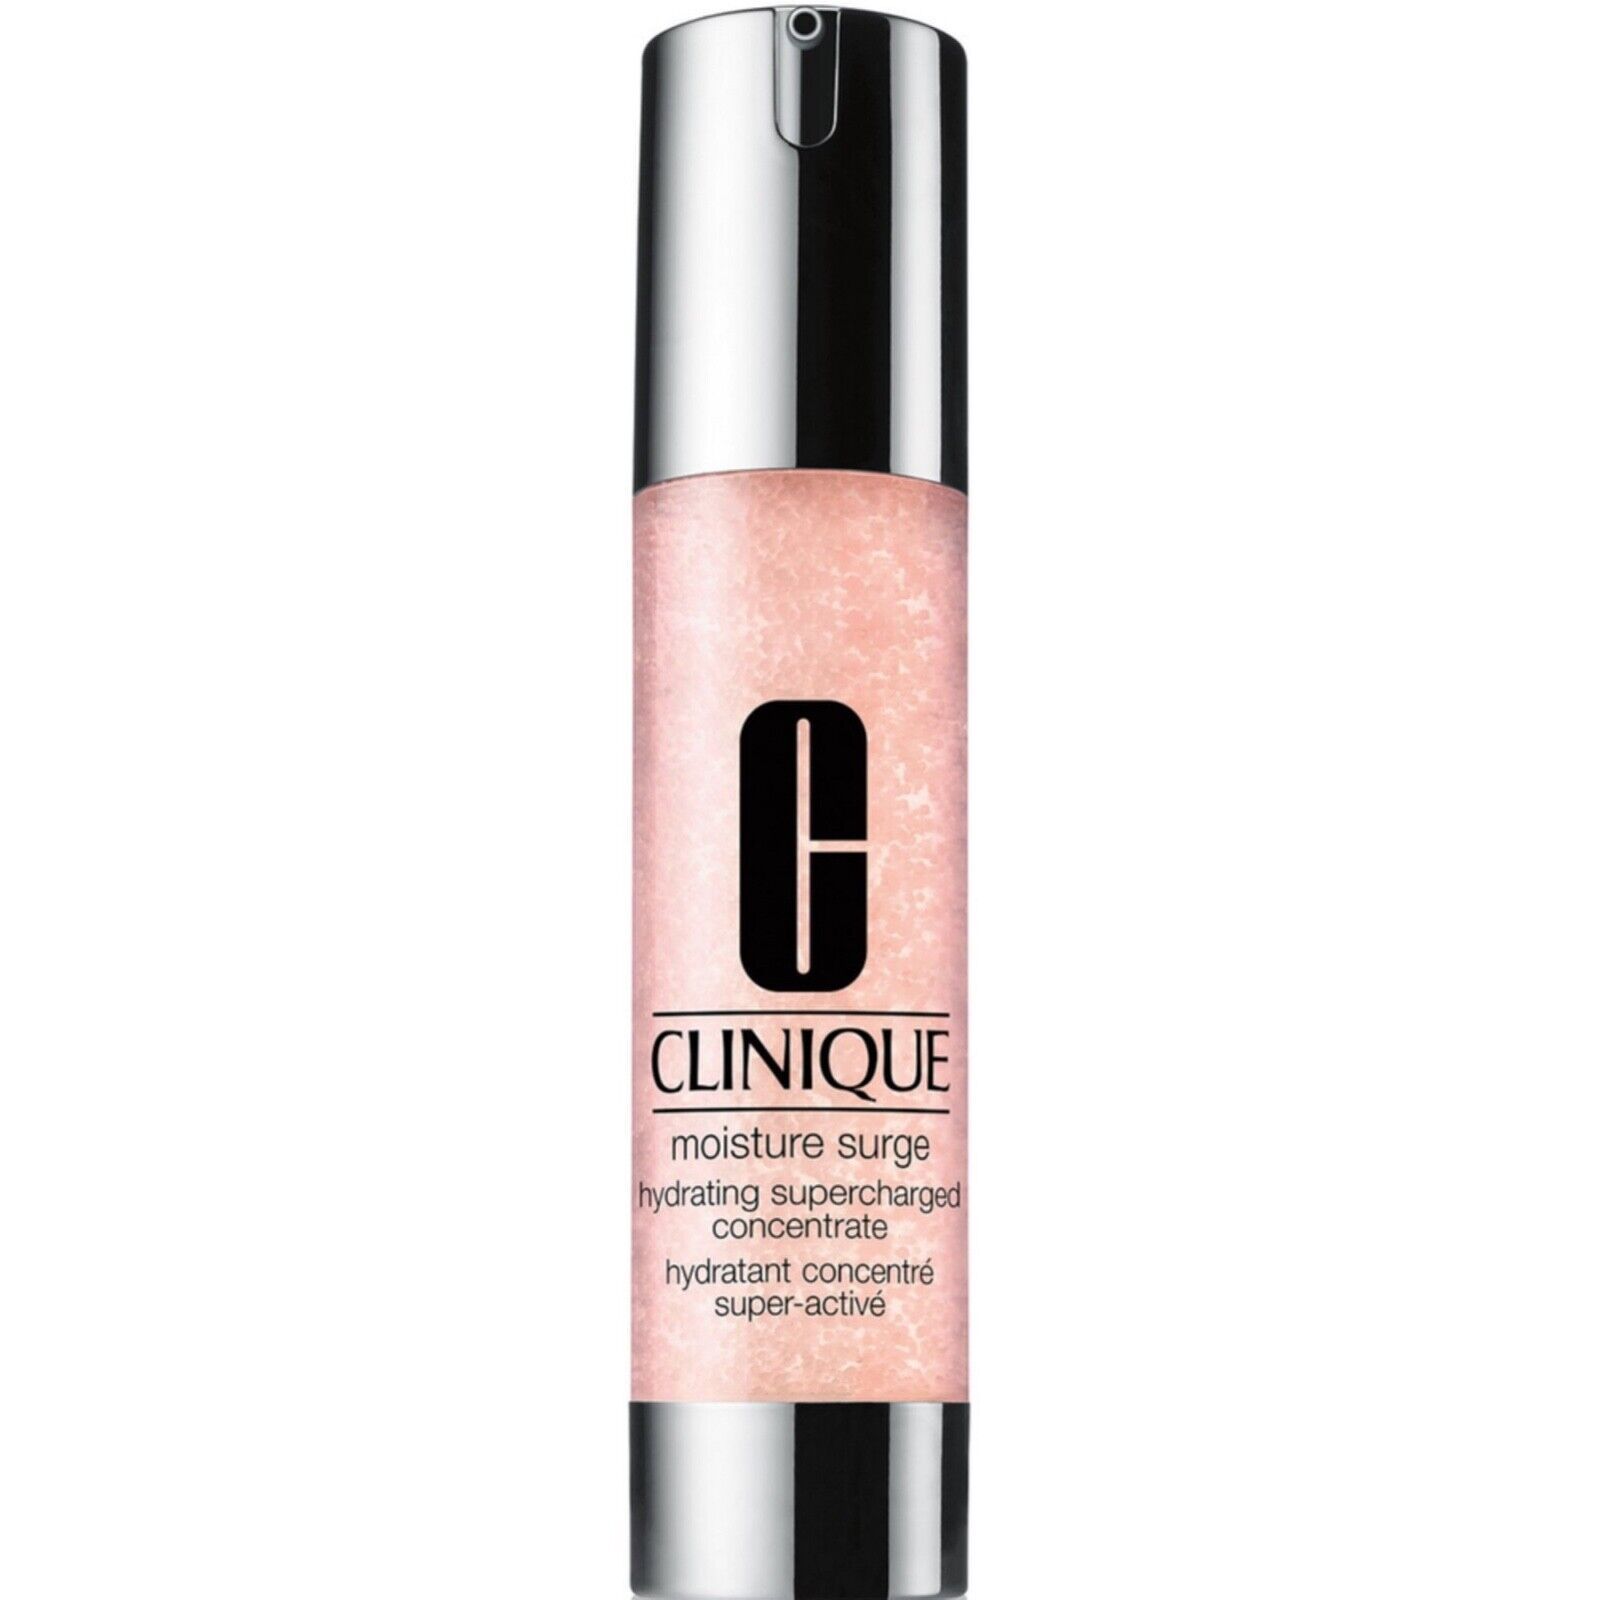 Clinique Moisture Hydrating Supercharged Concentrate Face Moisturizer 1.6 Oz.. - $89.09